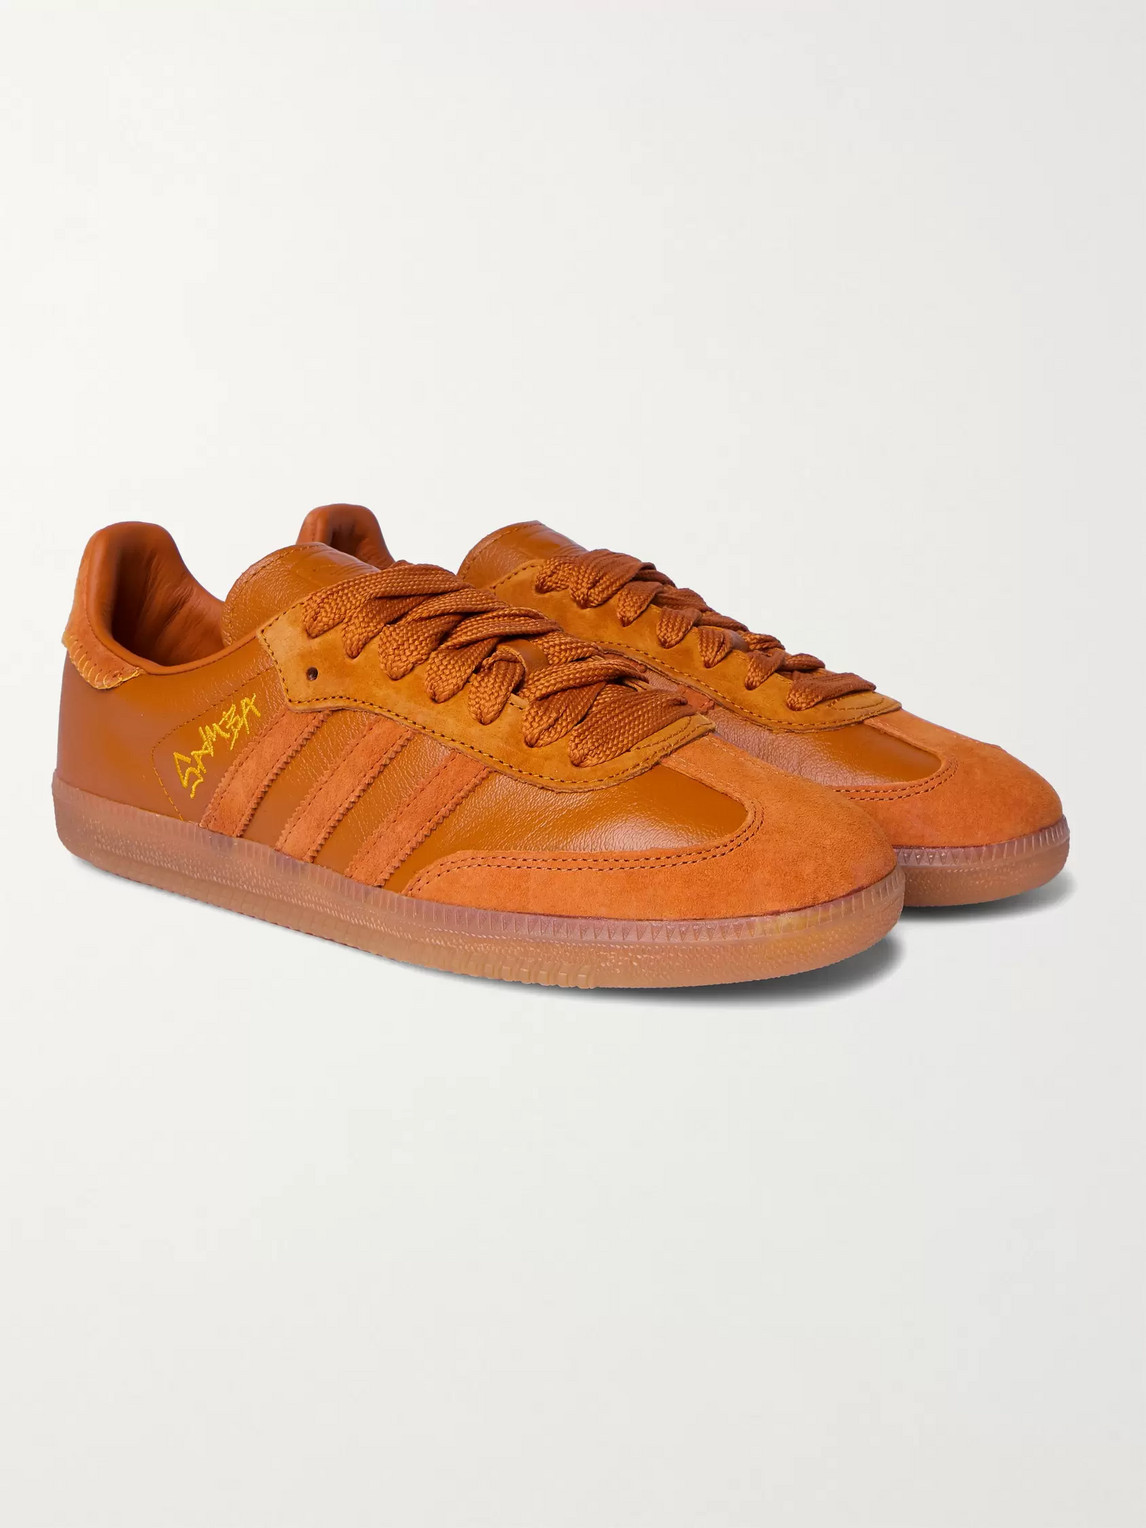 Adidas Consortium Jonah Hill Samba Embroidered Suede And Leather Sneakers In Brown